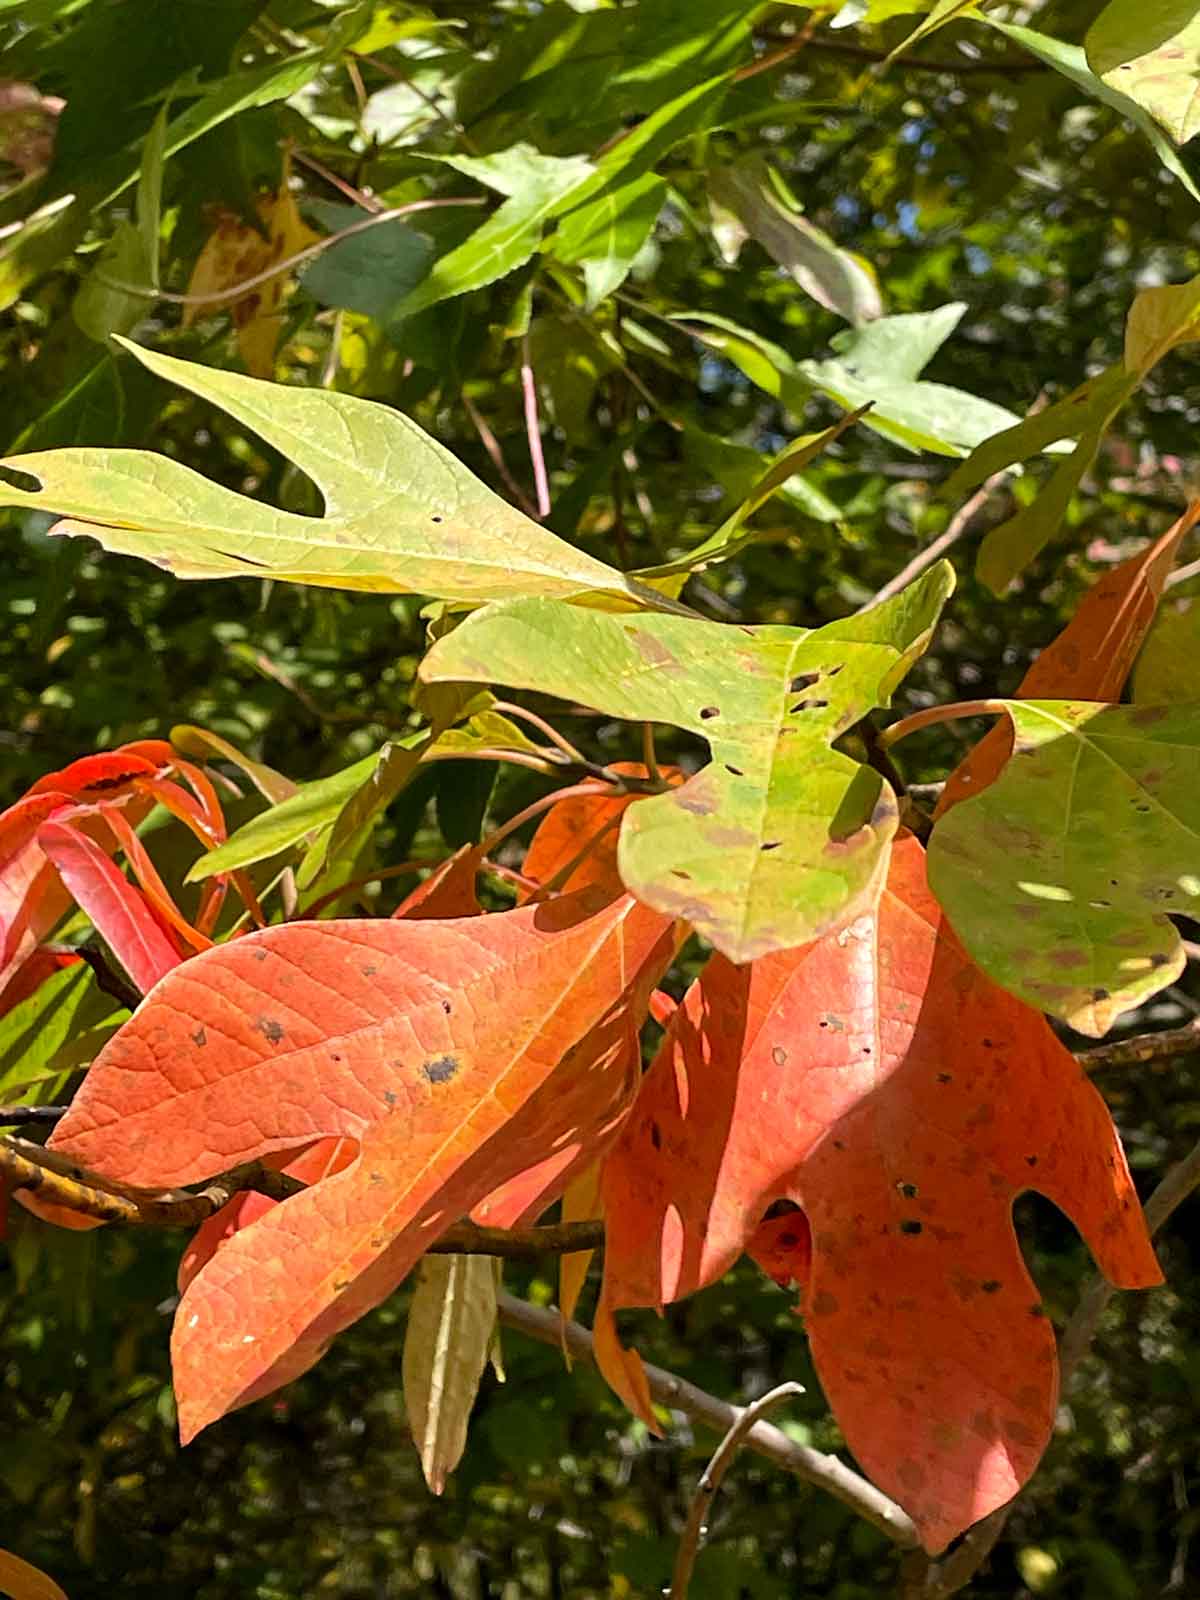 Sassafras is a dependable orange for my Wild Ozark Color Watch every year.